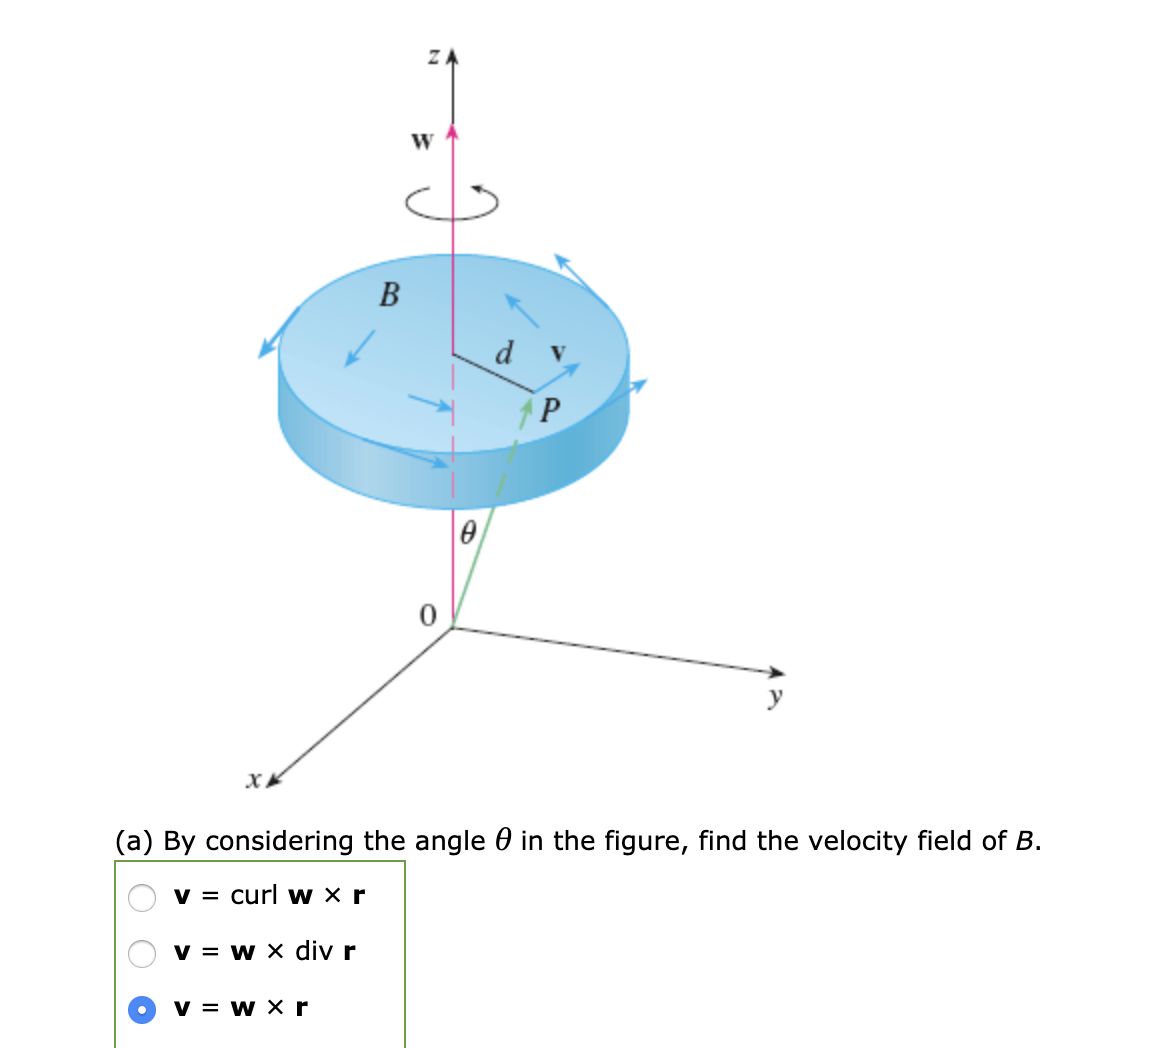 ZA
B
хк
(a) By considering the angle 0 in the figure, find the velocity field of B.
v = curl
w × r
v = w x div r
v = w X r
